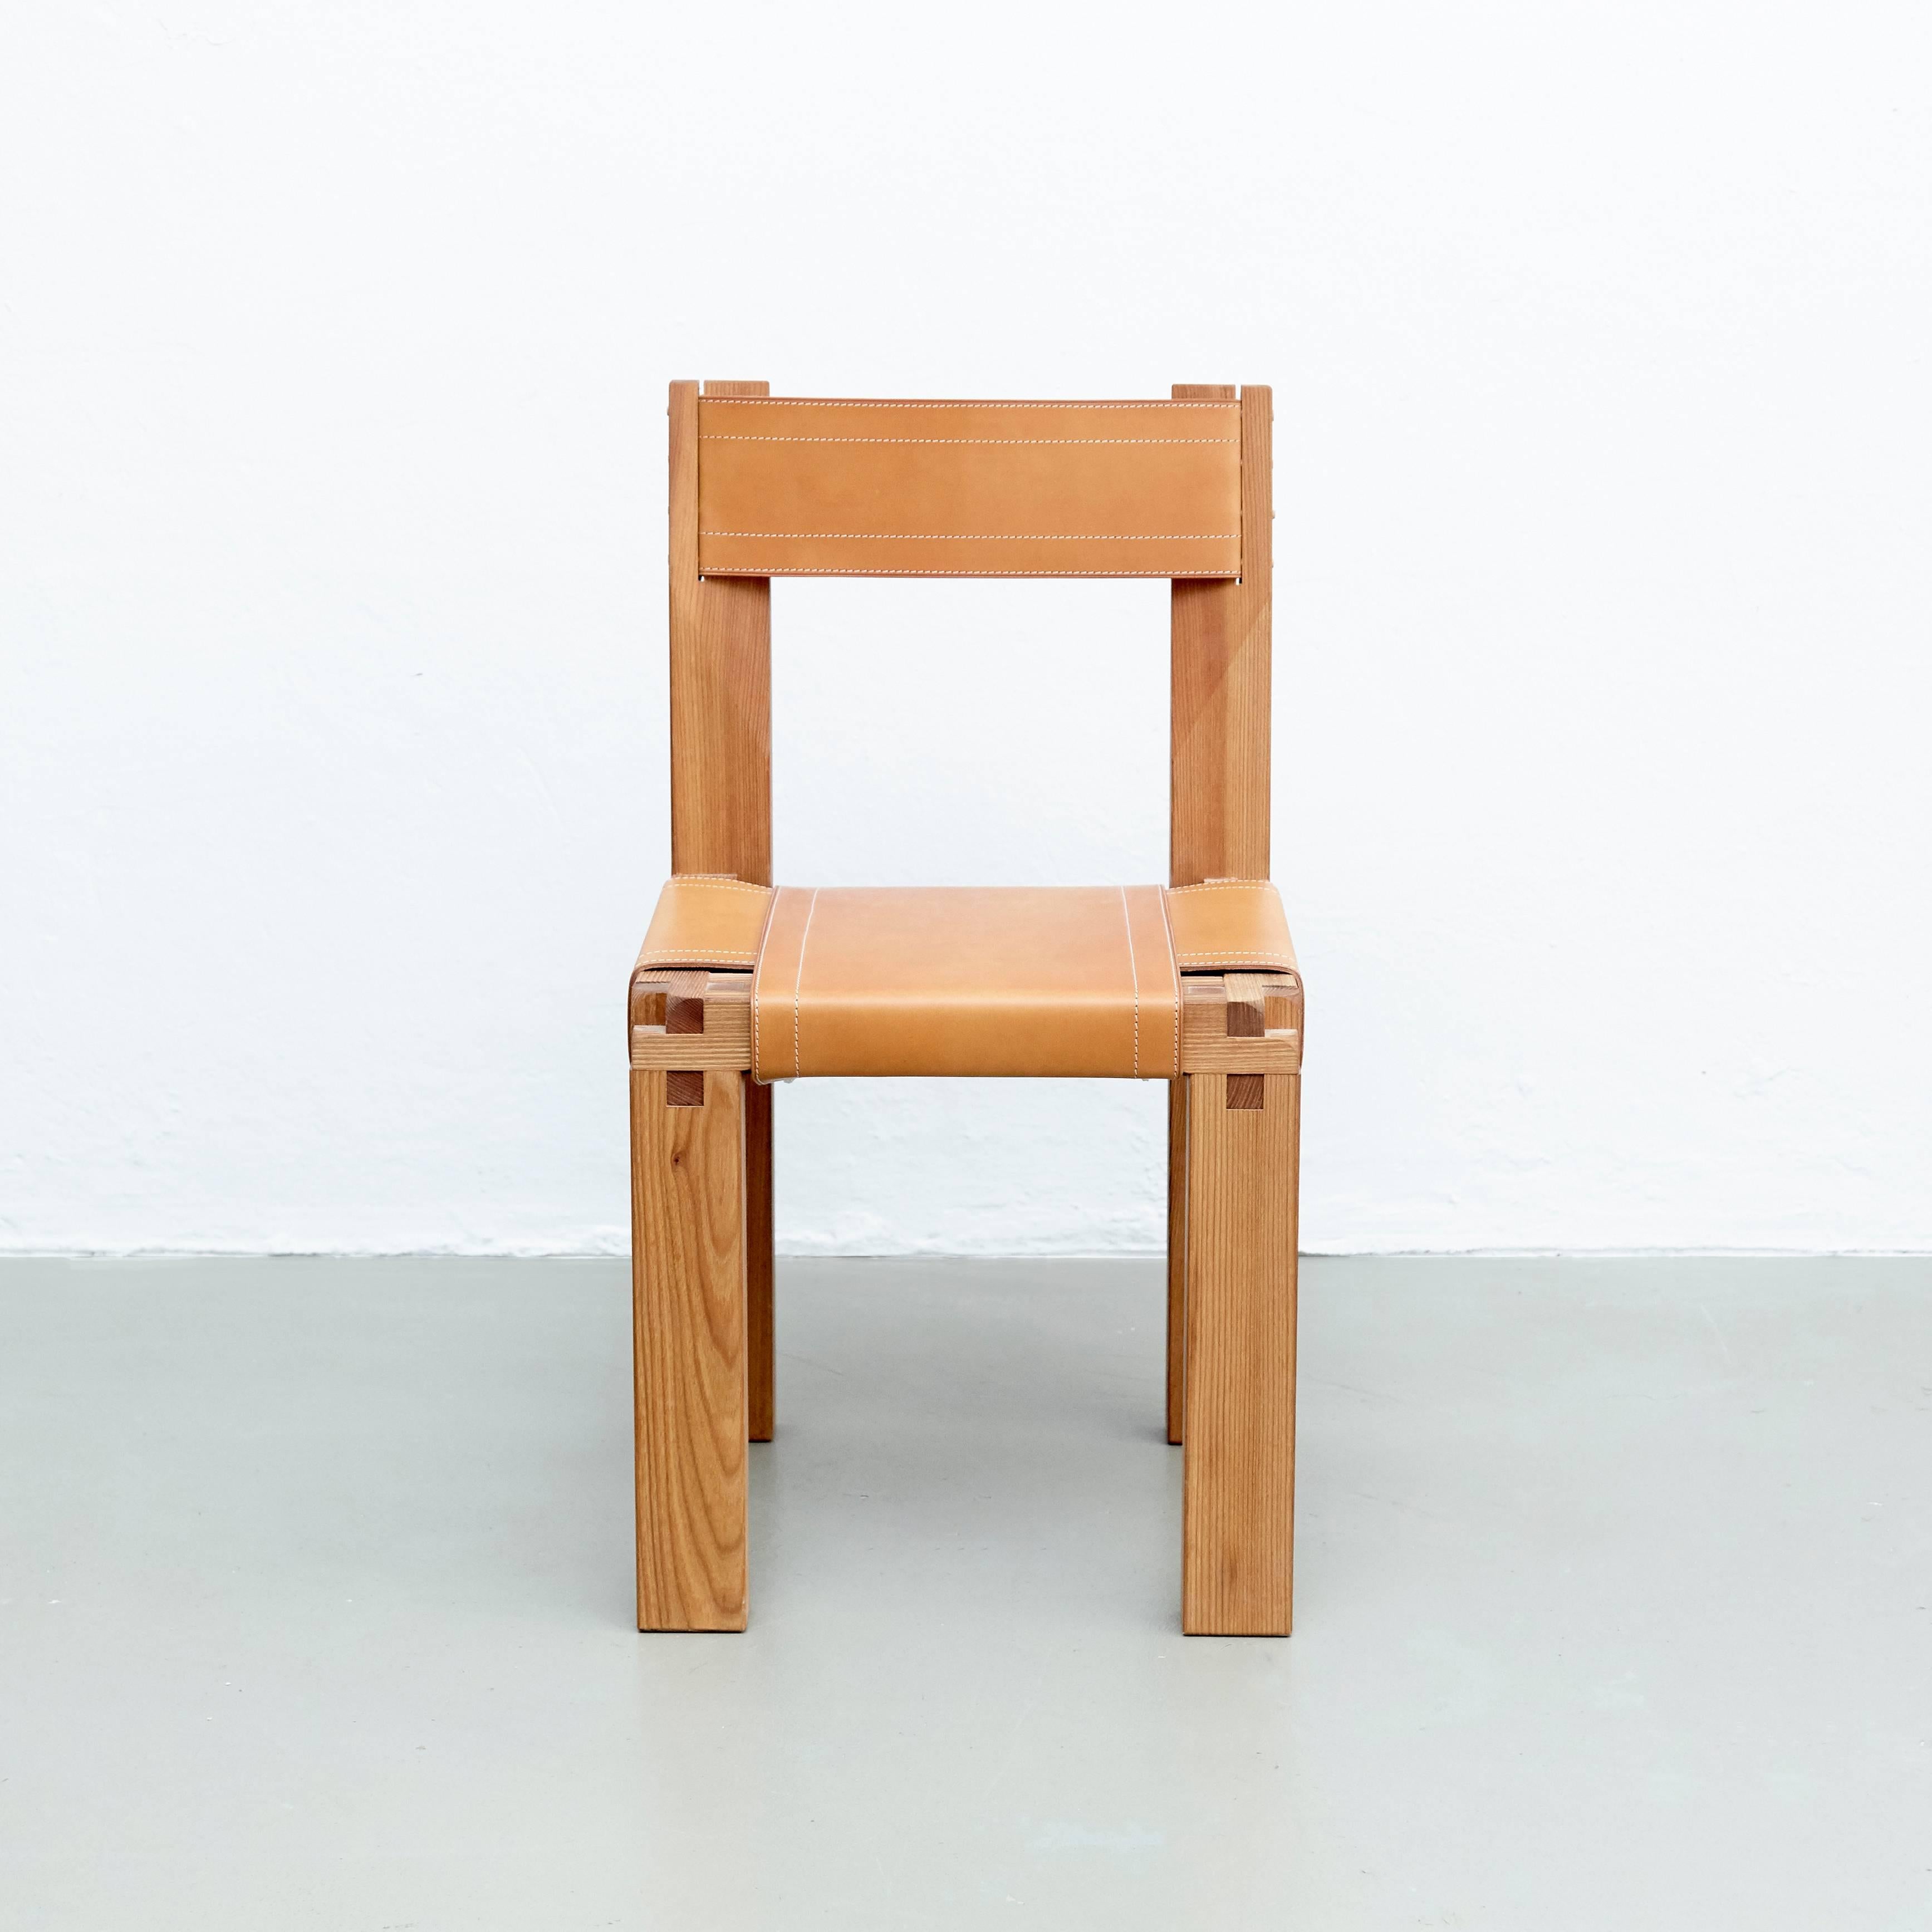 S 11 chair designed by Pierre Chapo, circa 1960.
Manufactured by Chapo Creation in France, 2016.
Solid elm, seat stretched in thick leather.

In good original condition, with minor wear consistent with age and use, preserving a beautiful